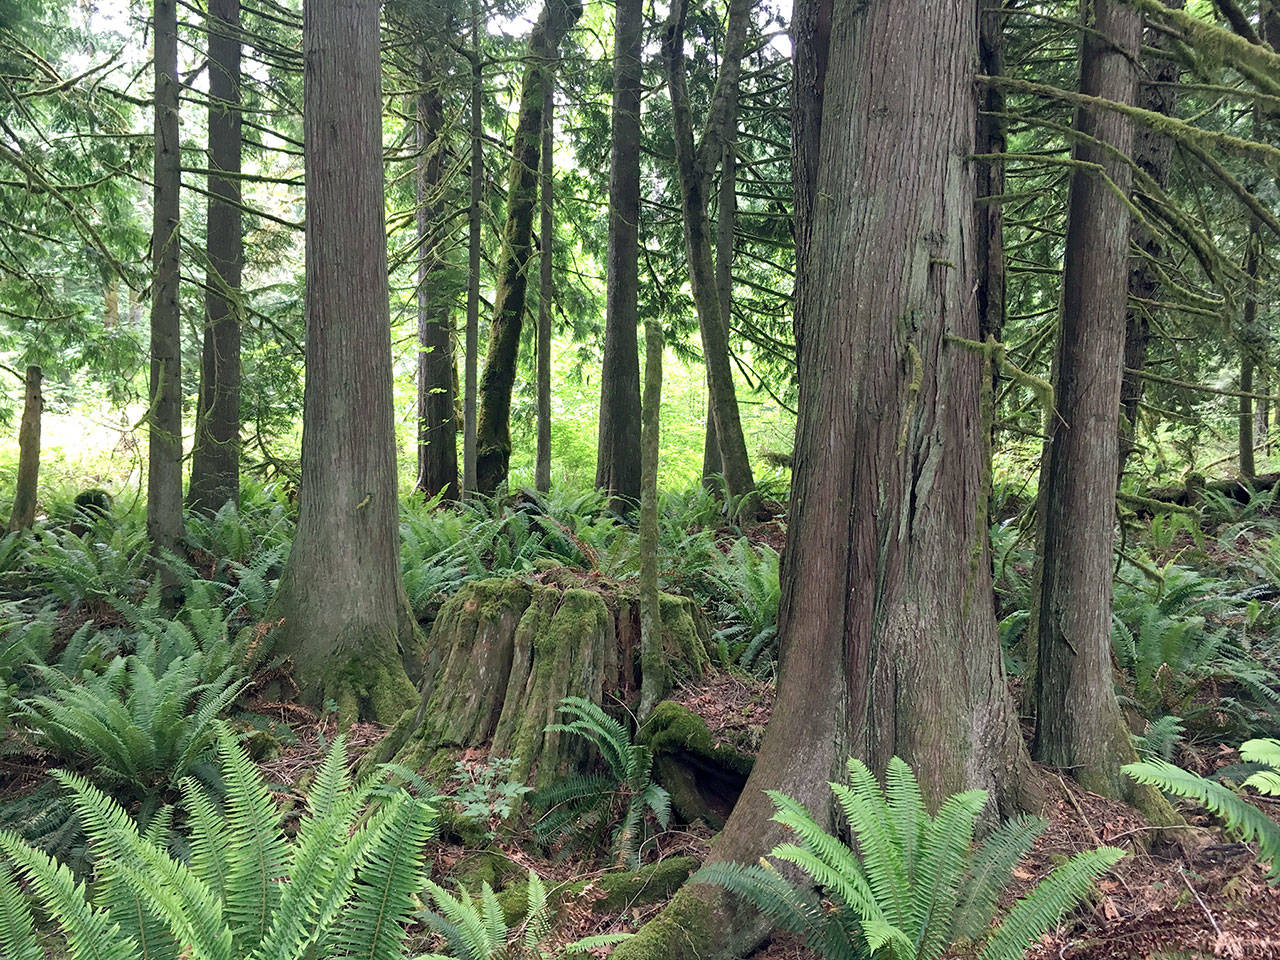 The Northwest Watershed Institute is raising money to conserve a native older forest in the Tarboo Creeks watershed. (Northwest Watershed Institute)